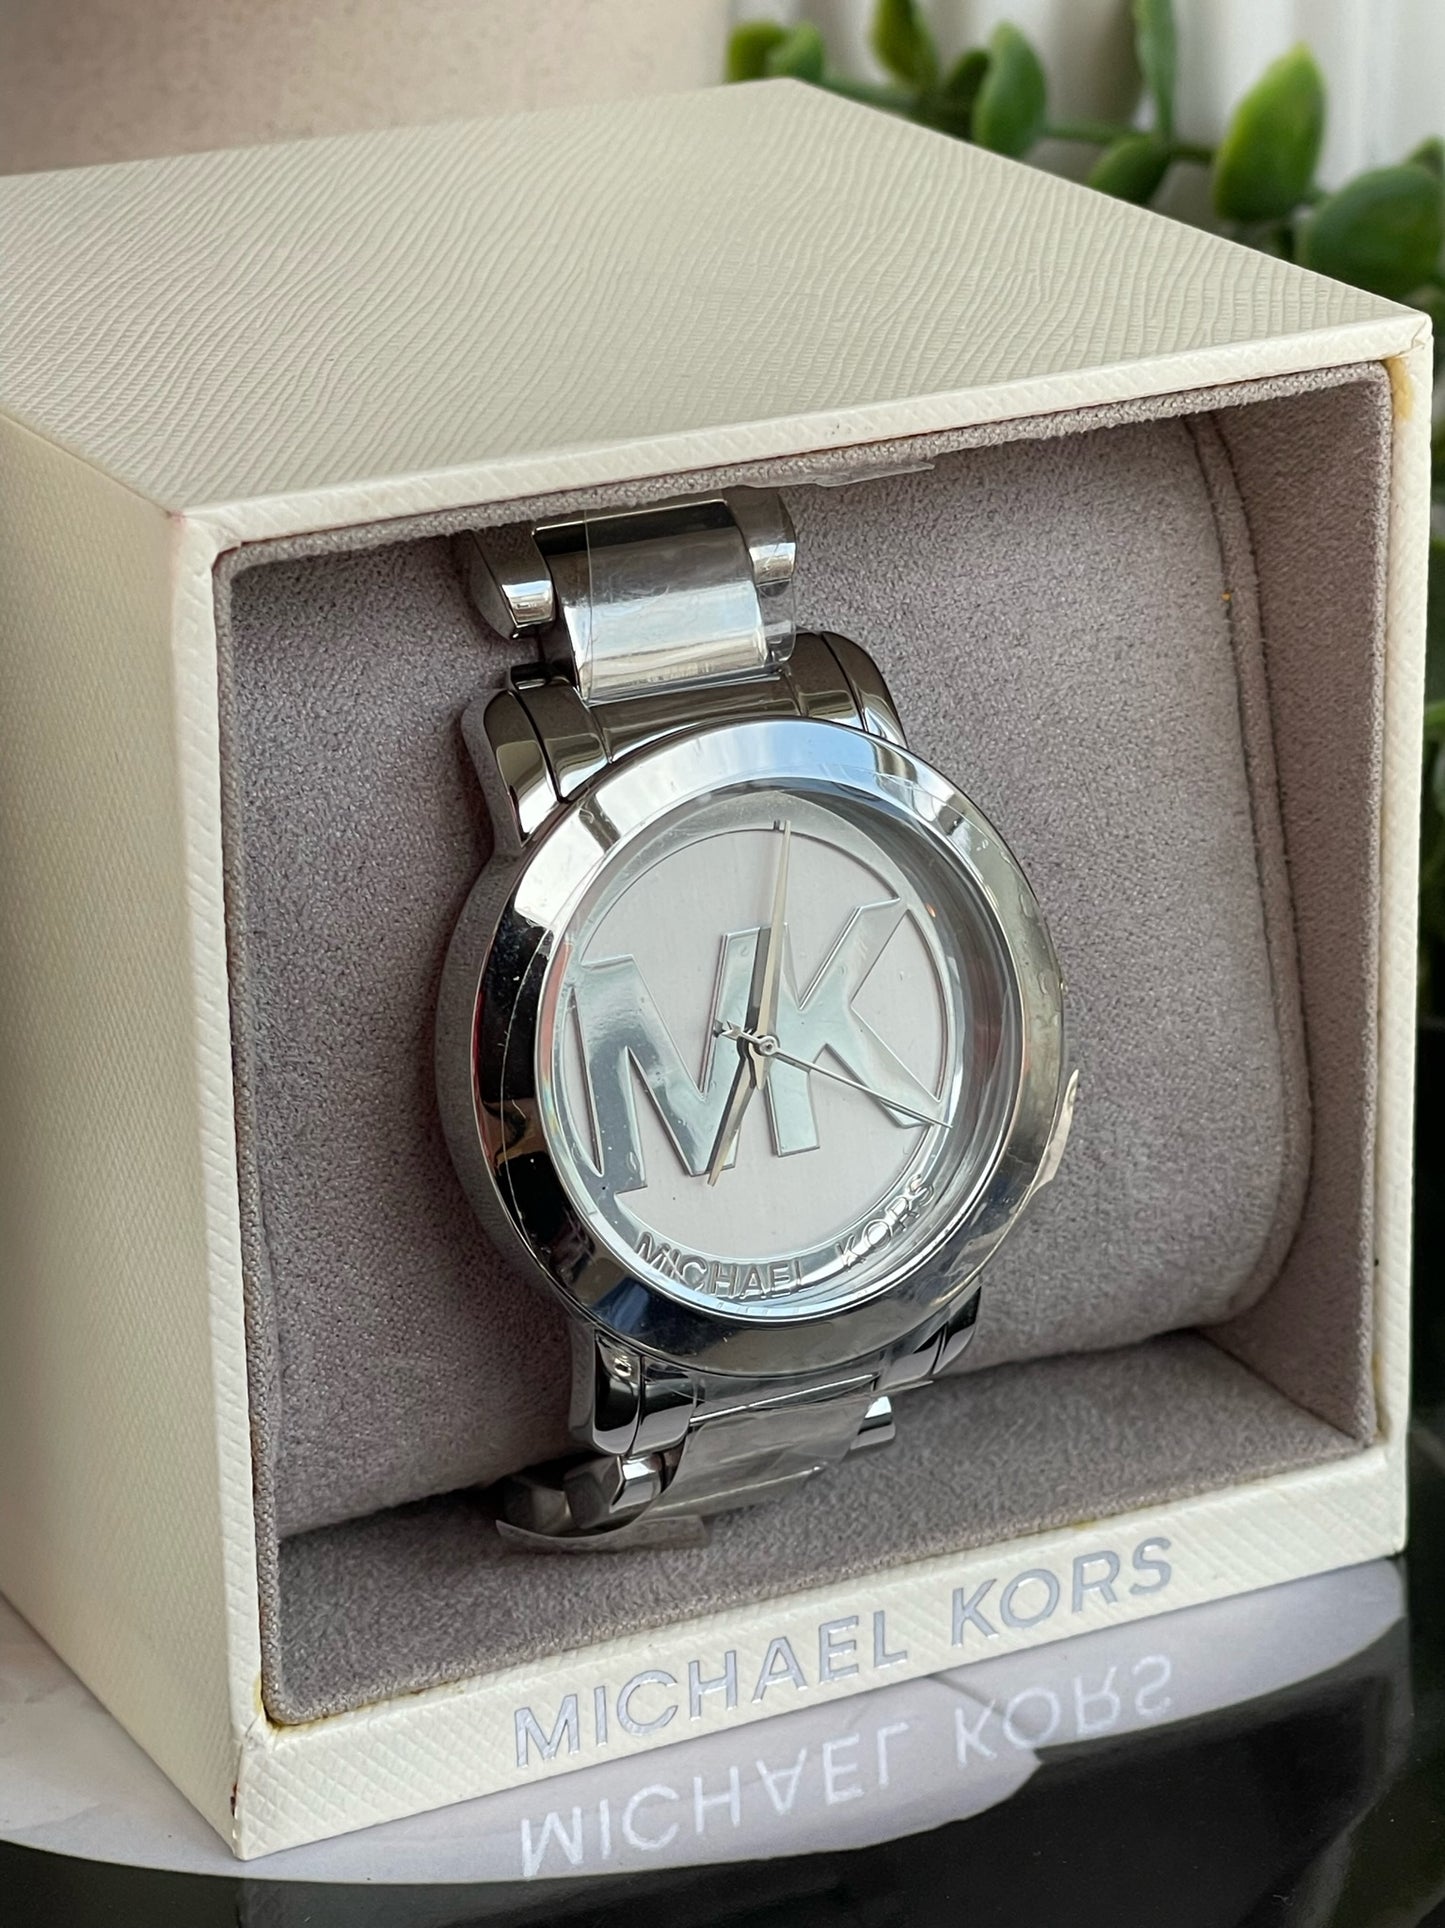 Four Easy Ways to Spot a Fake Michael Kors Watch